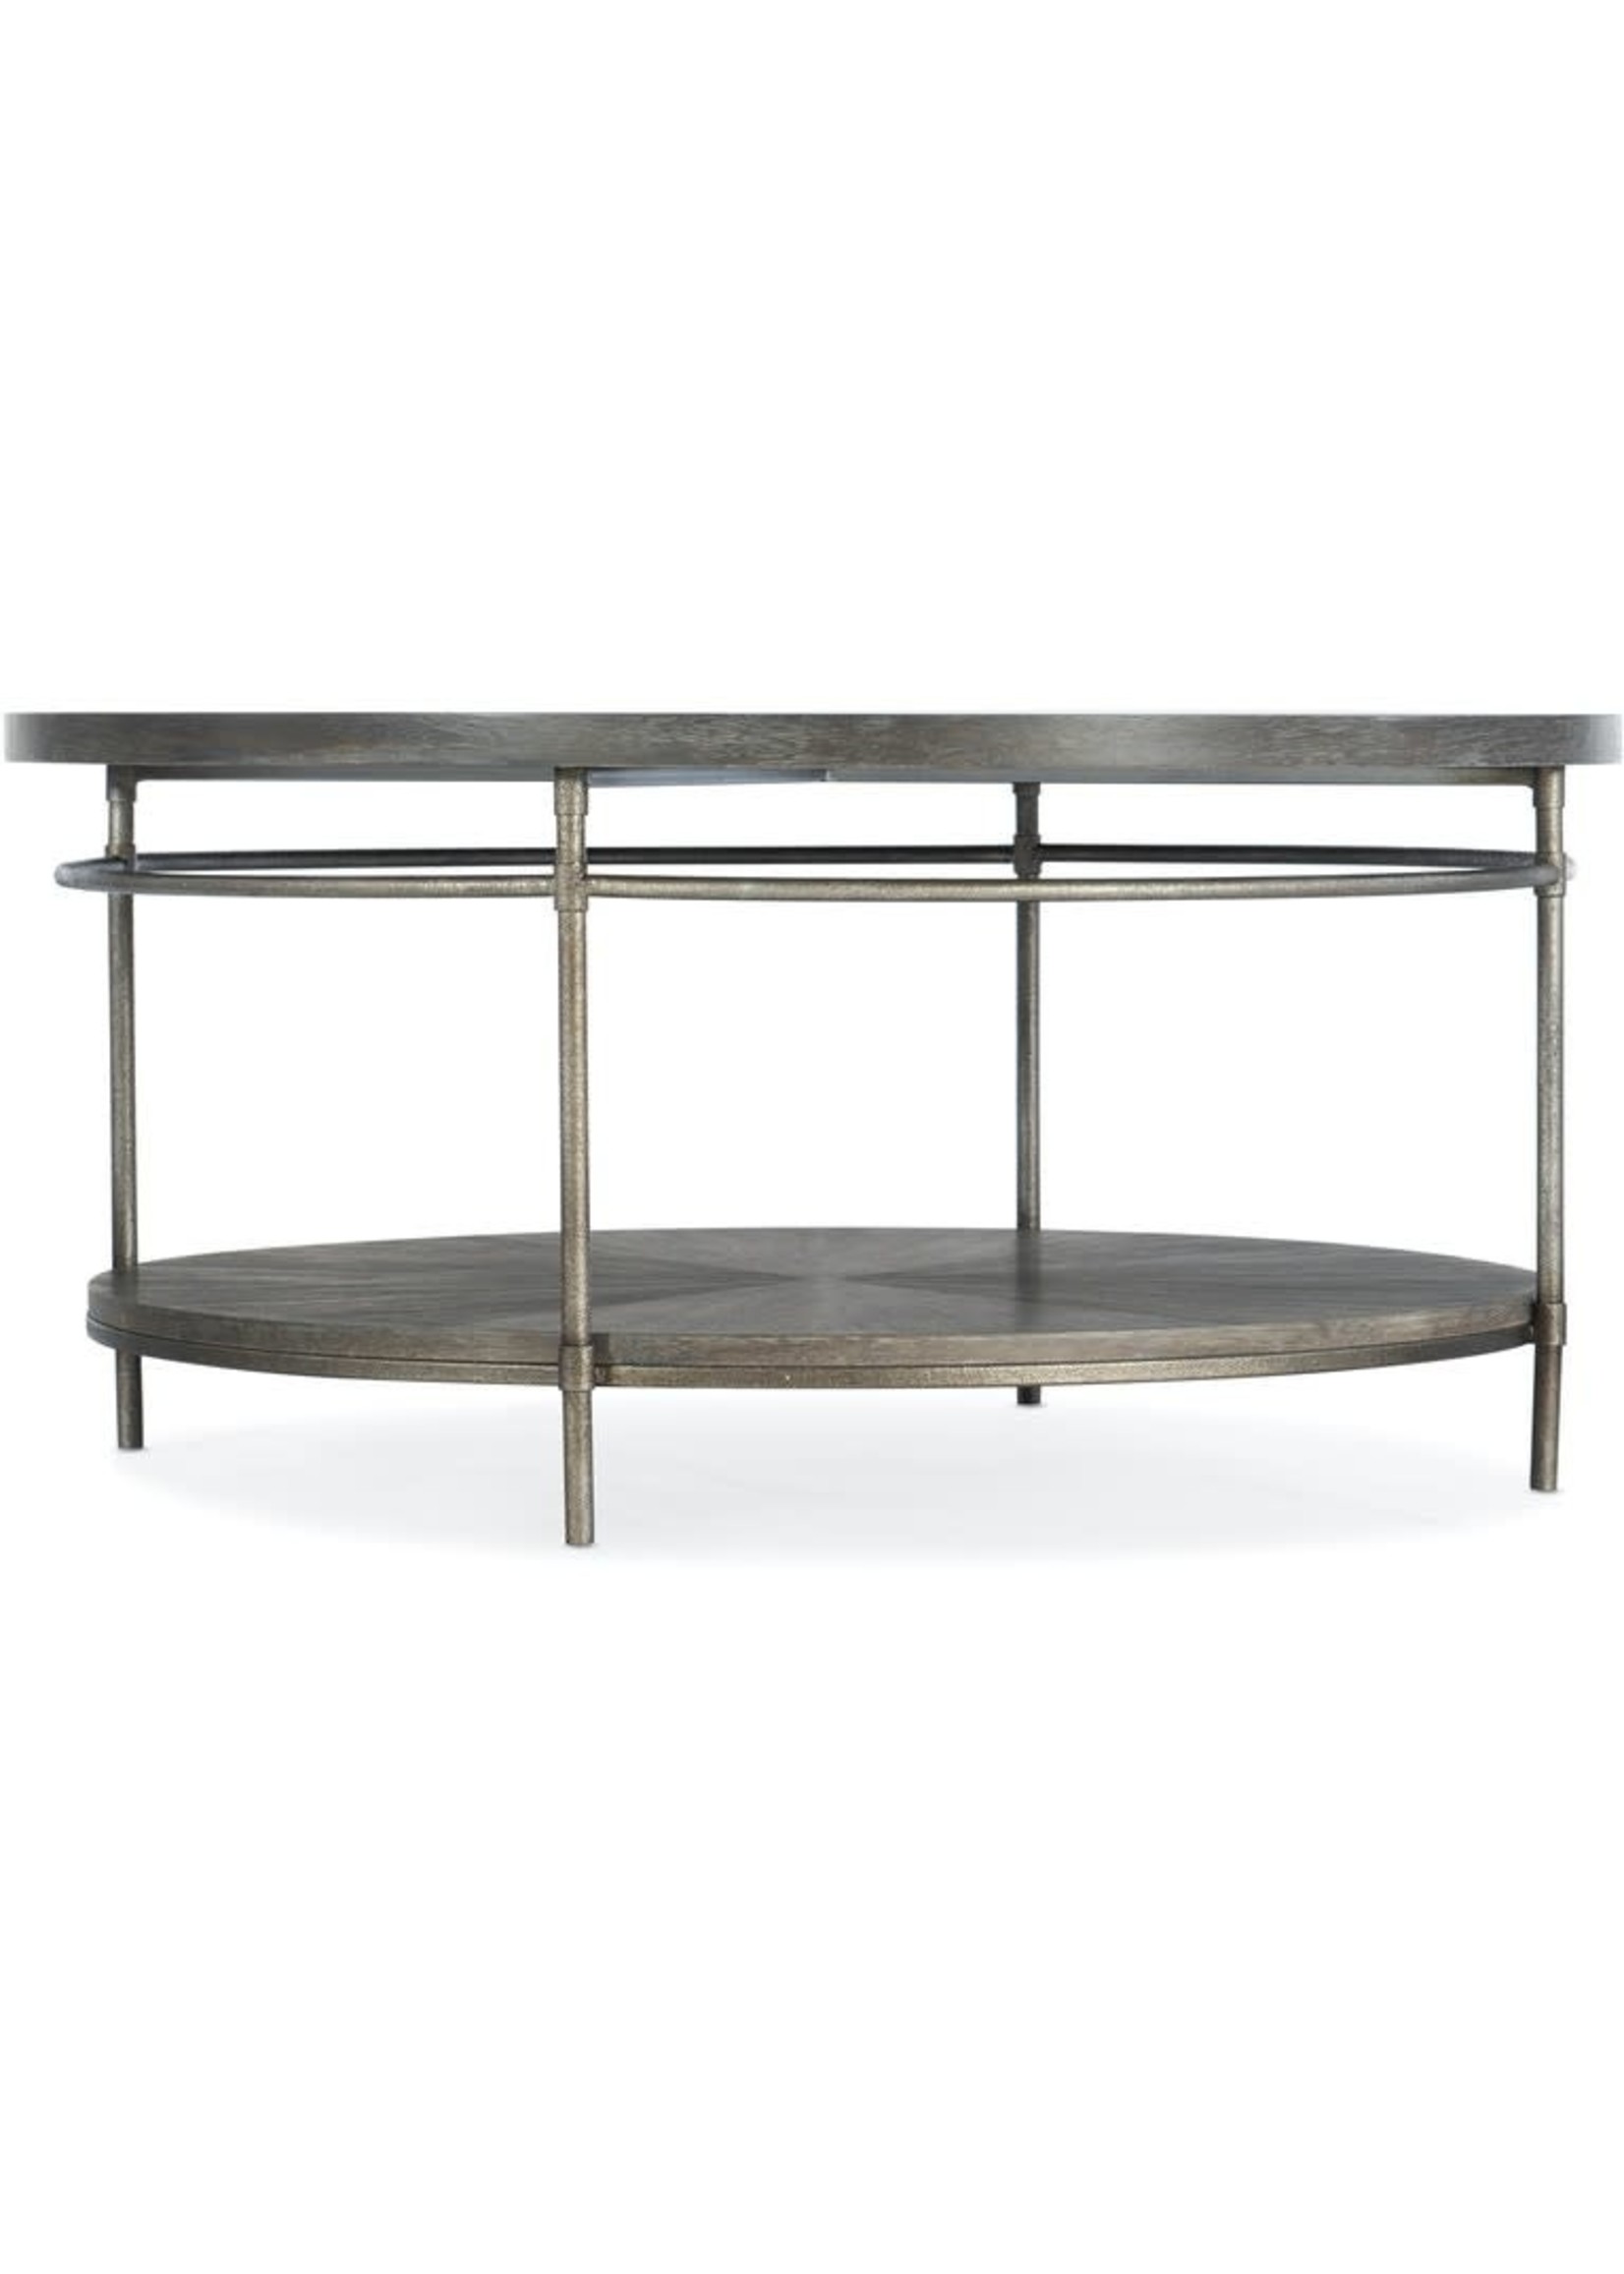 HOOKER FURNITURE ROUND COCKTAIL TABLE